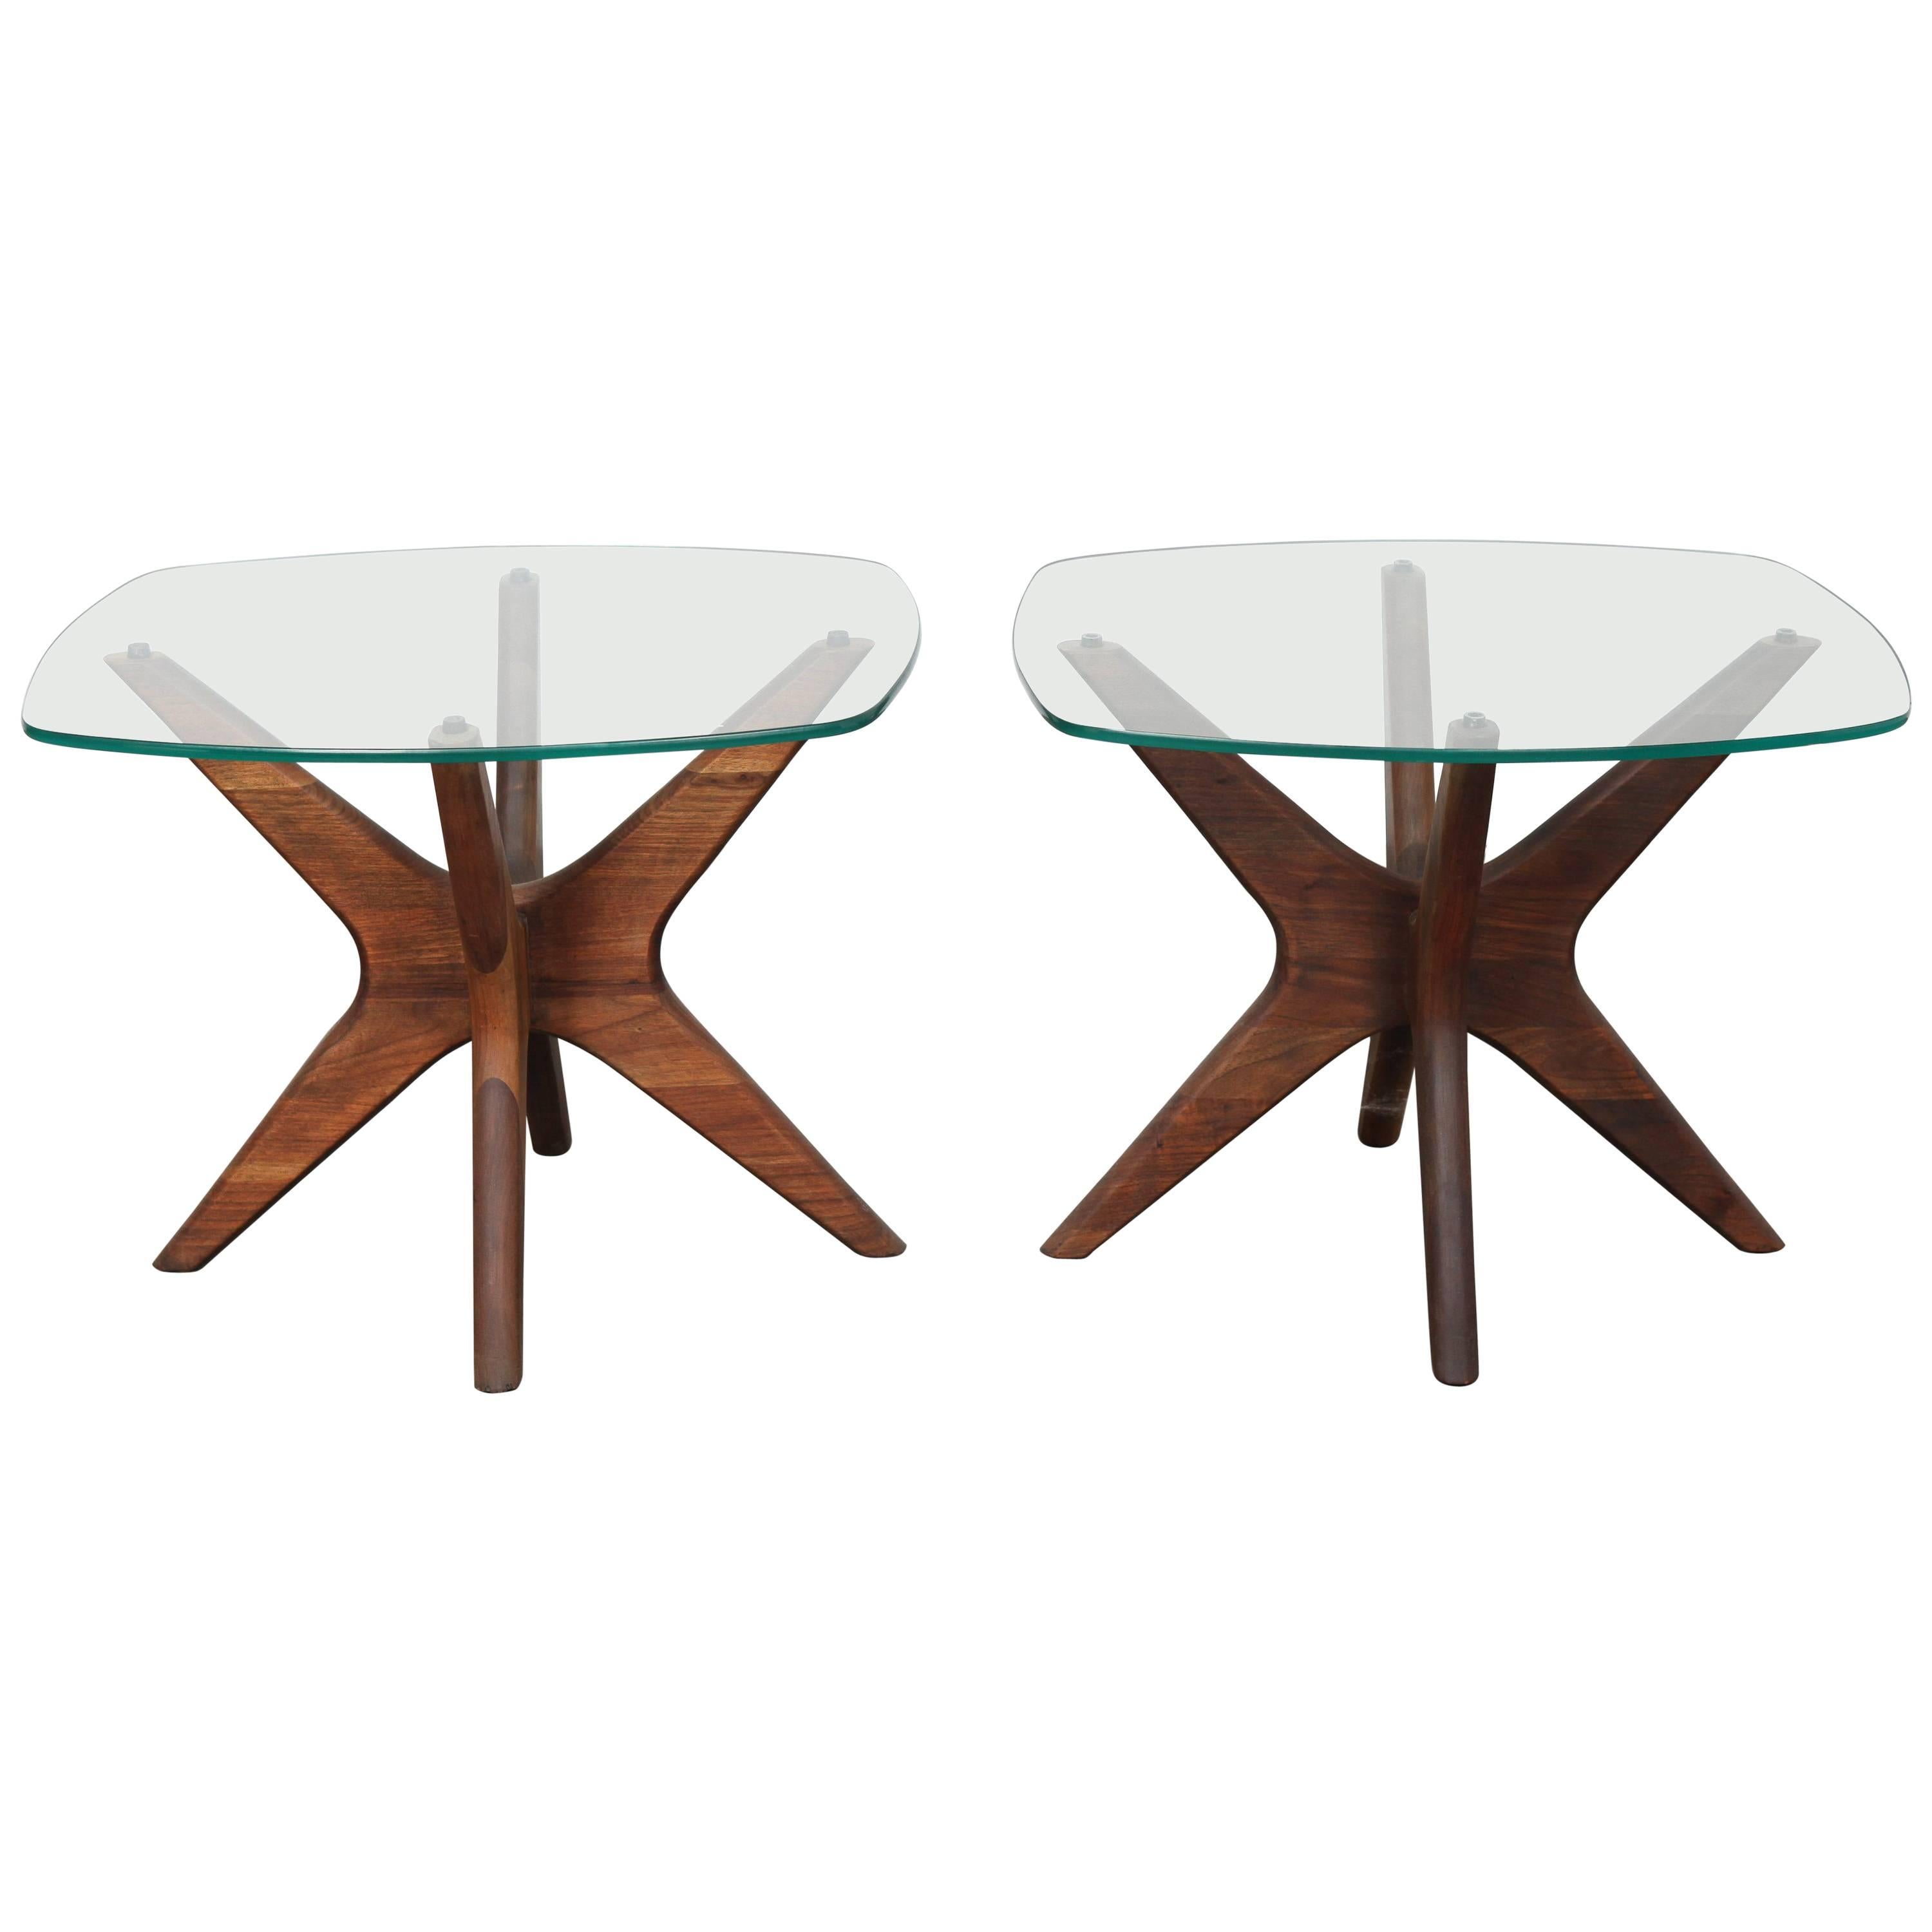 Pair of Mid-Century Walnut End Tables by Adrian Pearsall for Craft Associates